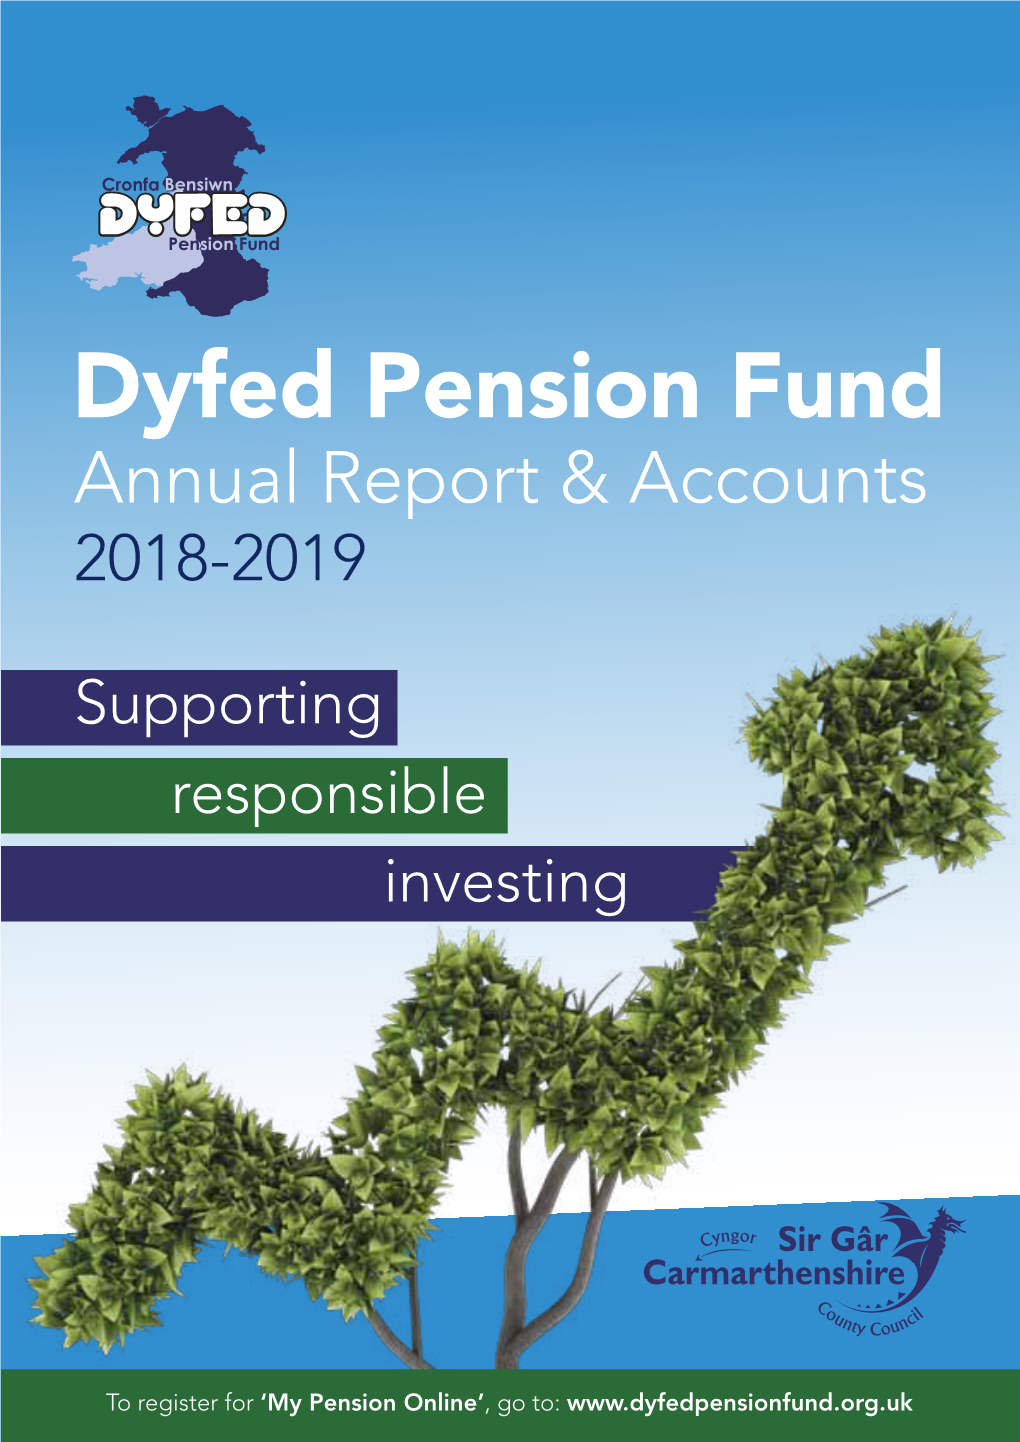 Dyfed Pension Fund Annual Report & Accounts 2018-2019